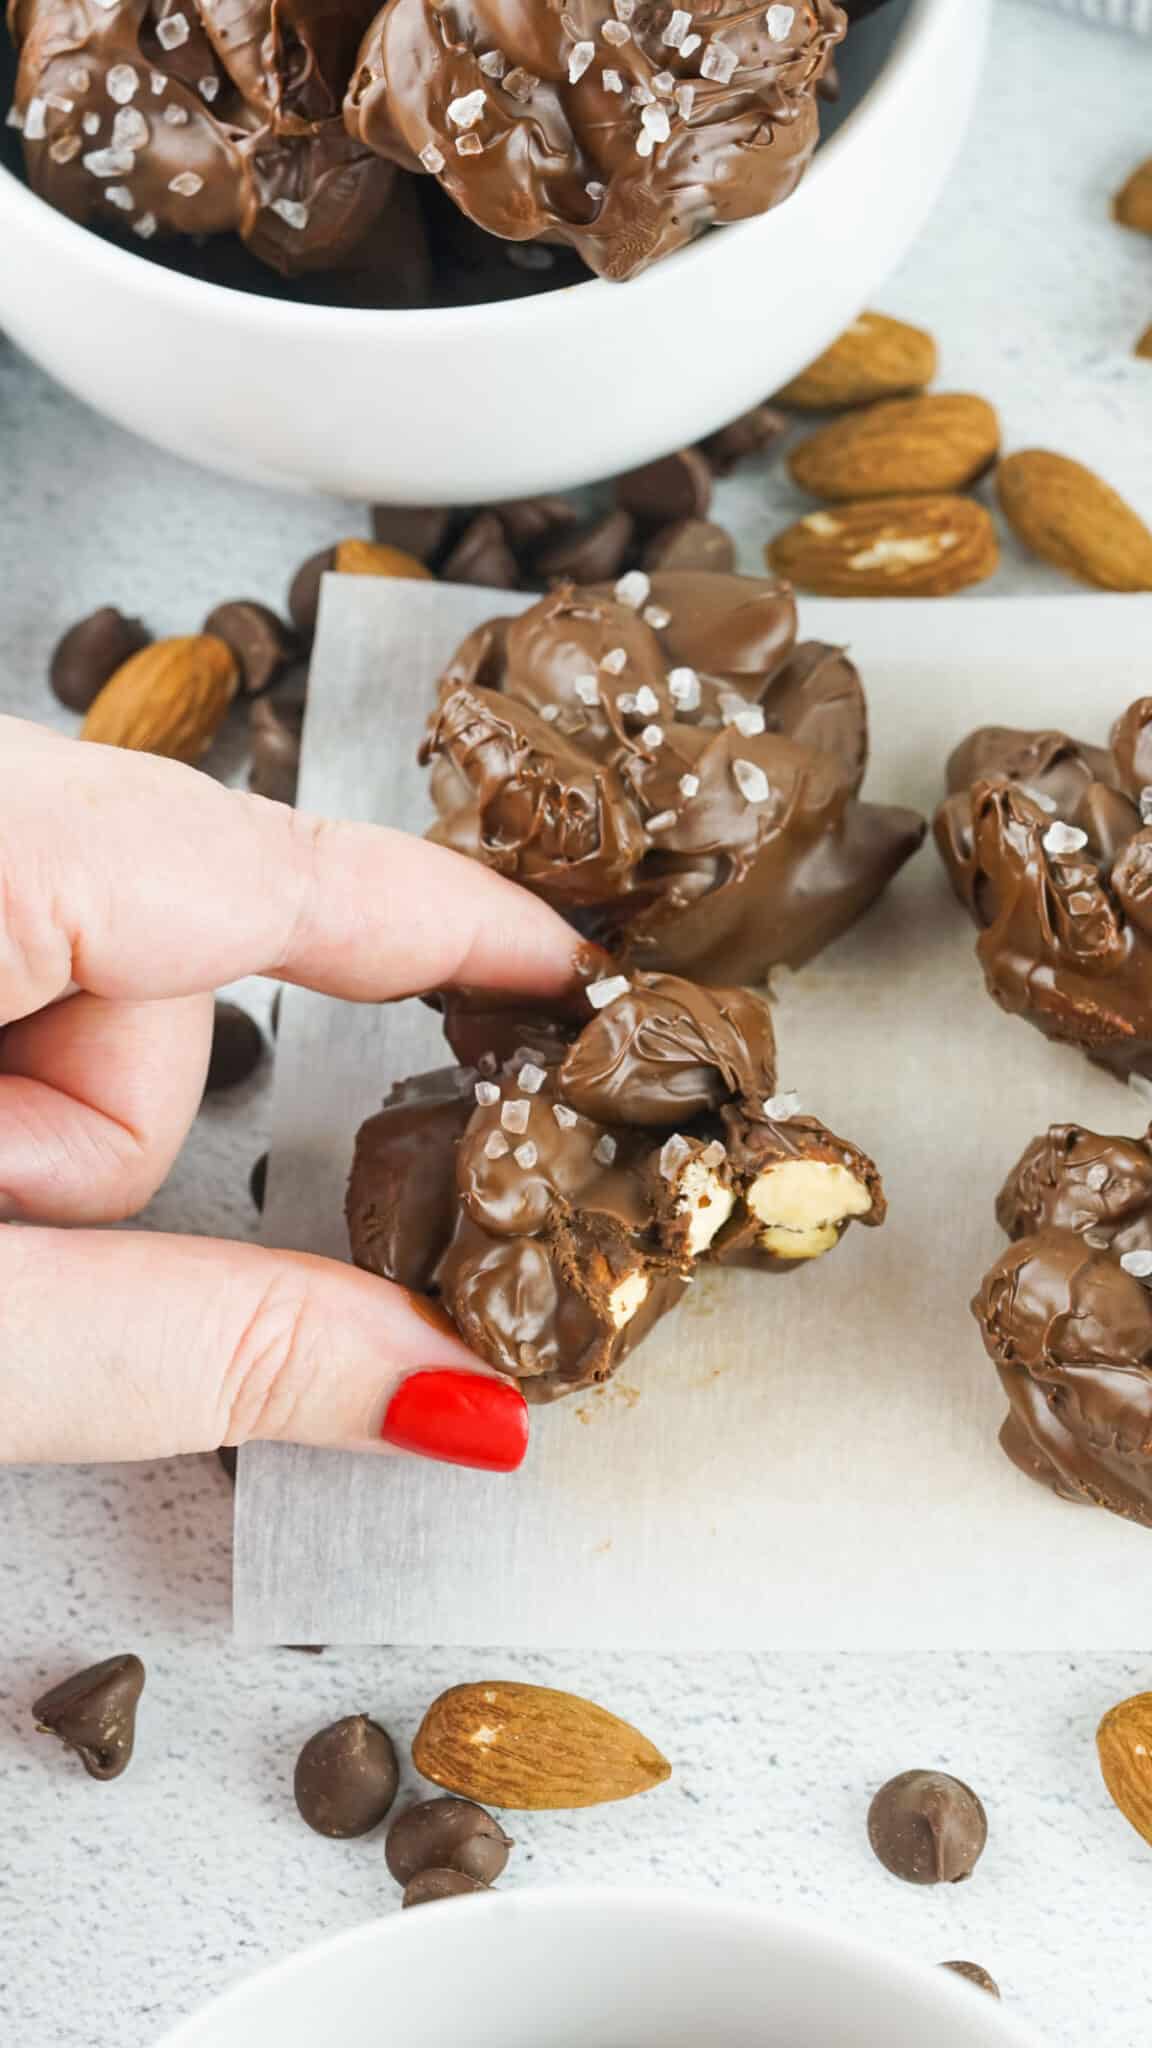 Chocolate clusters being taken from a bowl and placed on some parchment paper to rest